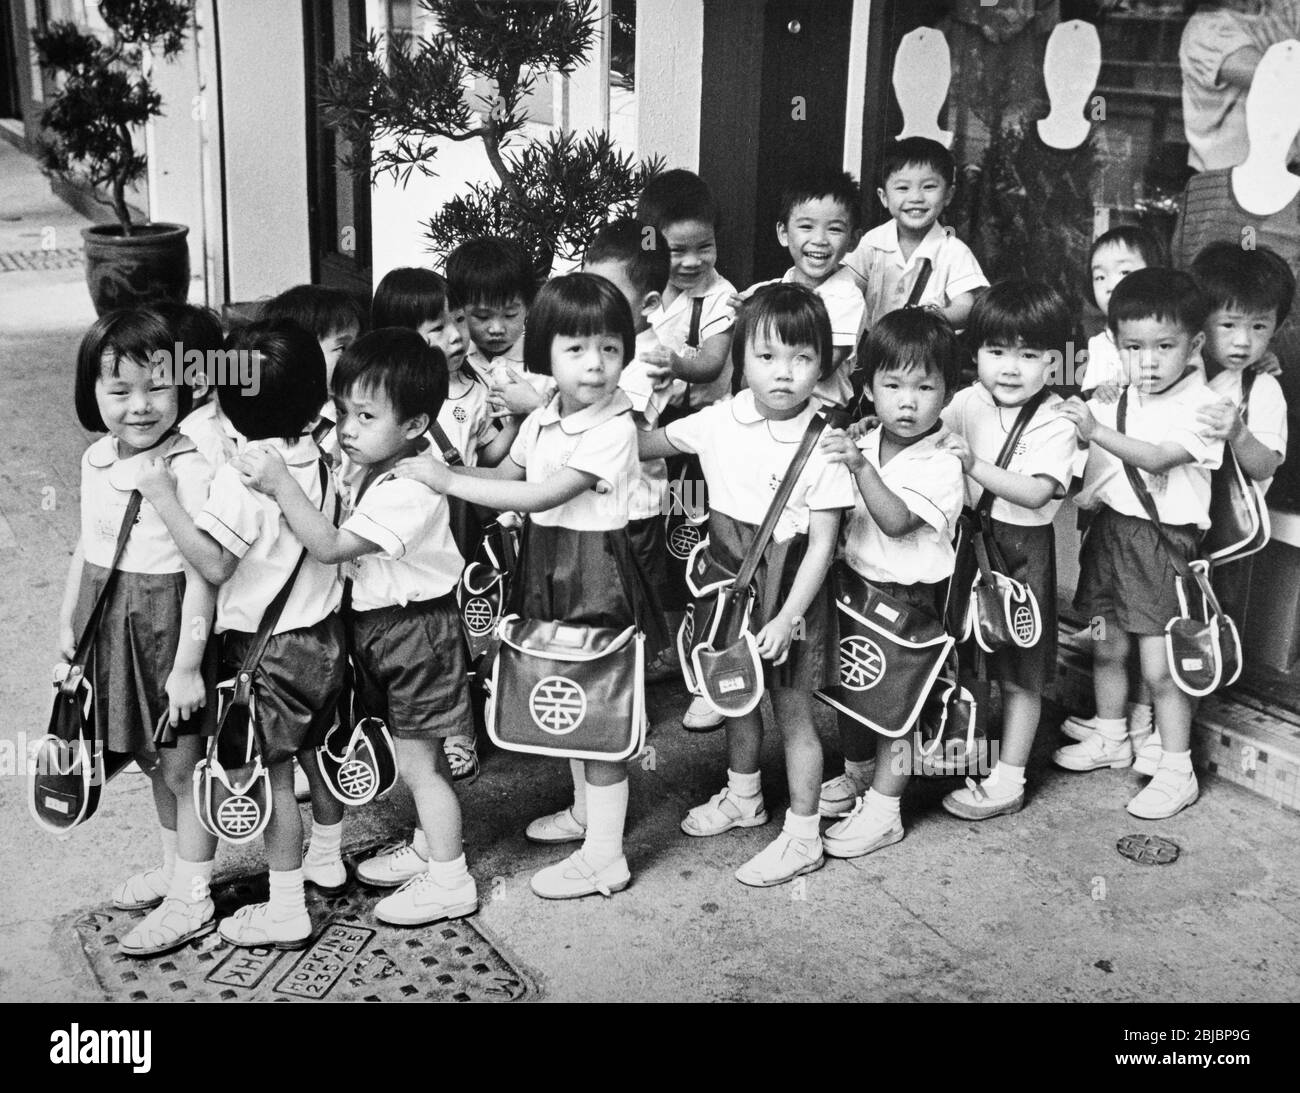 Hong Kong October 1986 Happy Valley Kindergarden School. The picture is is part of a collection of photographs taken in Hong Kong between September and November, 1986. They represent a snapshot of Daily Life in the Crown Colony eleven years before sovereignty was transferred back to mainland China. Photograph by Howard Walker / Alamy. Stock Photo